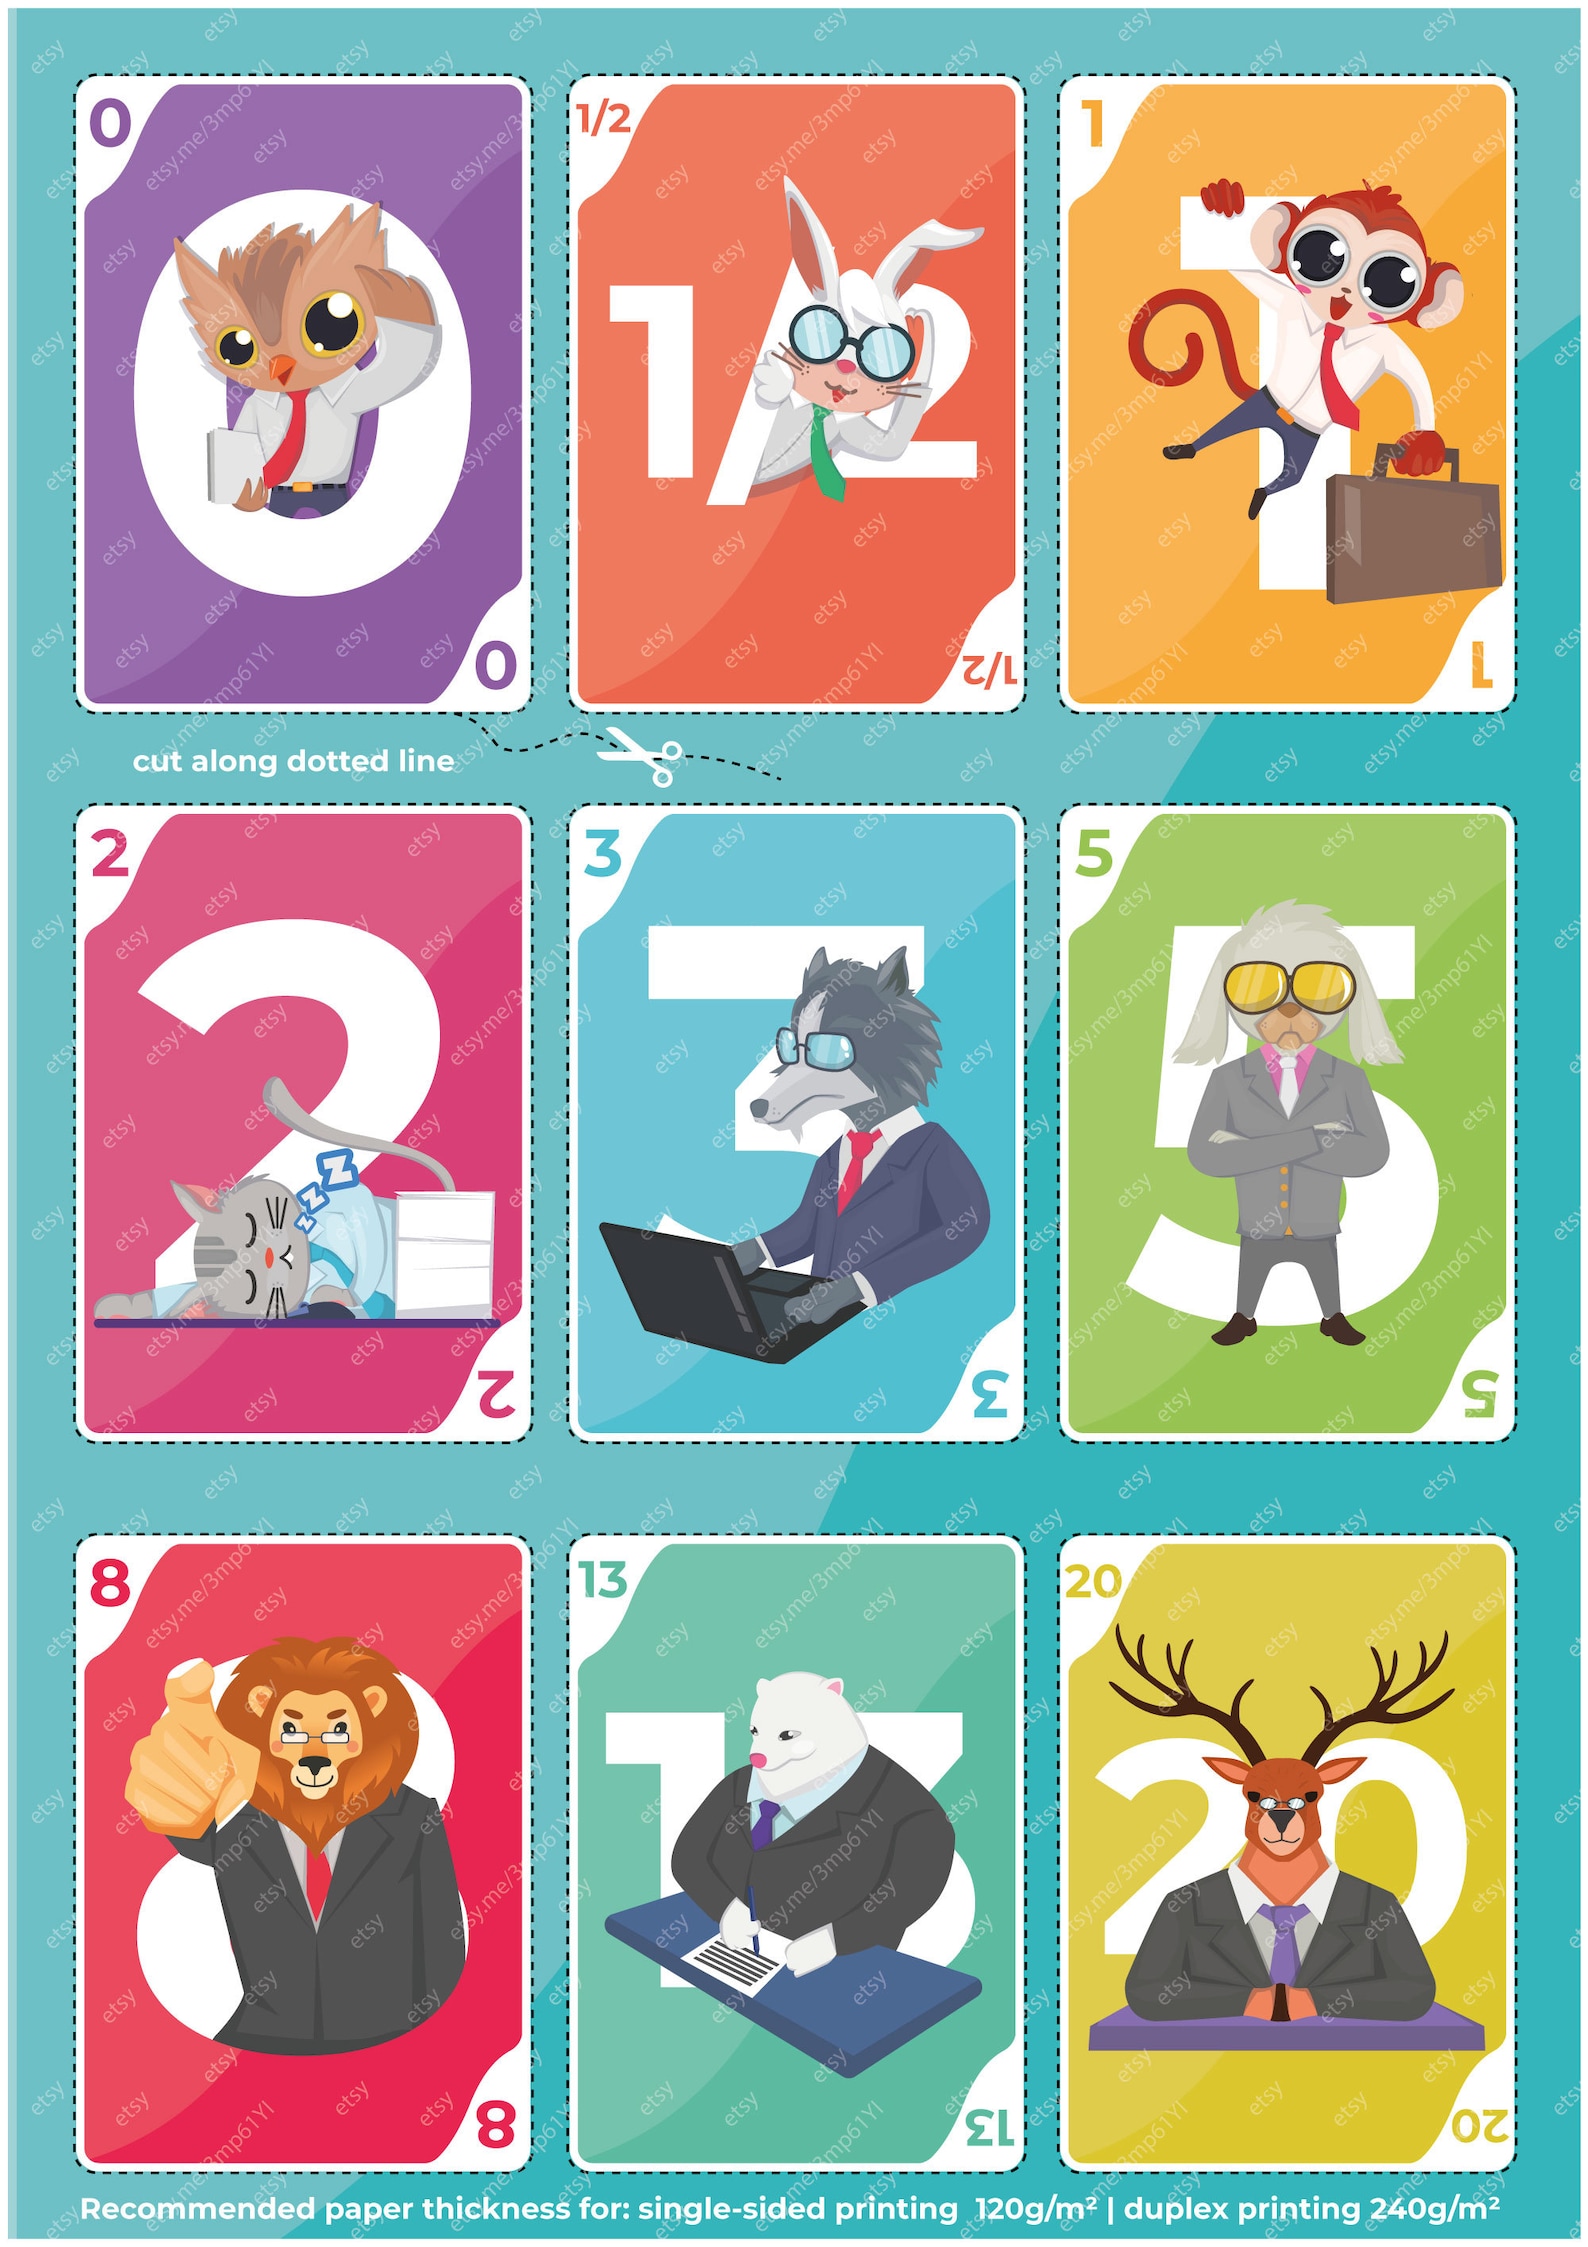 planning-poker-cards-story-points-printhome-etsy